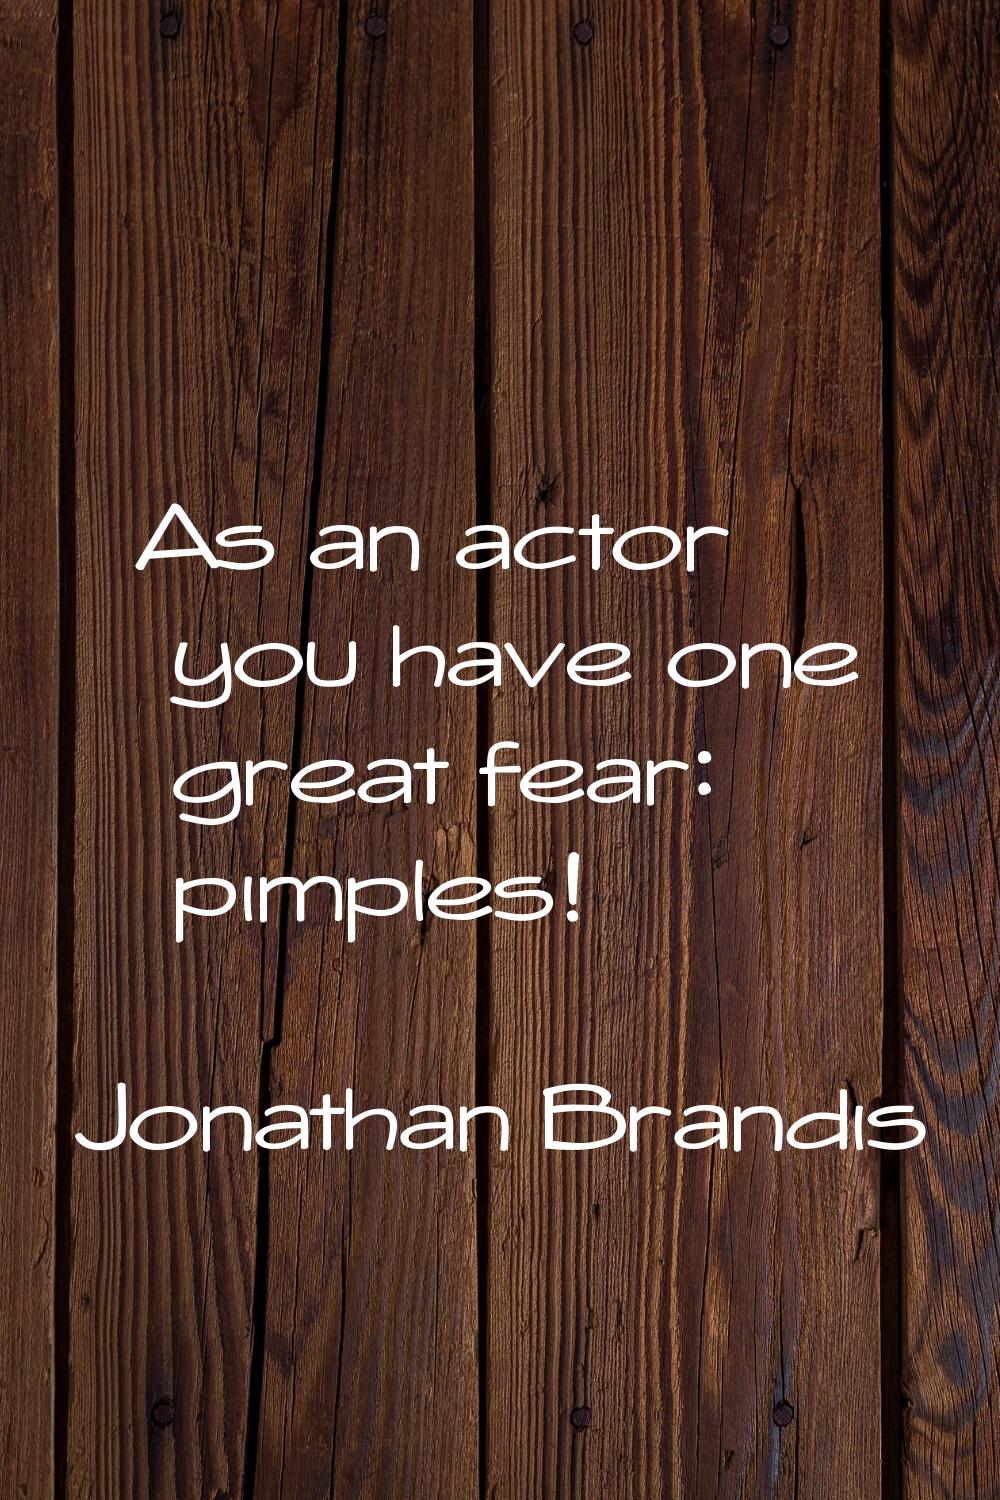 As an actor you have one great fear: pimples!